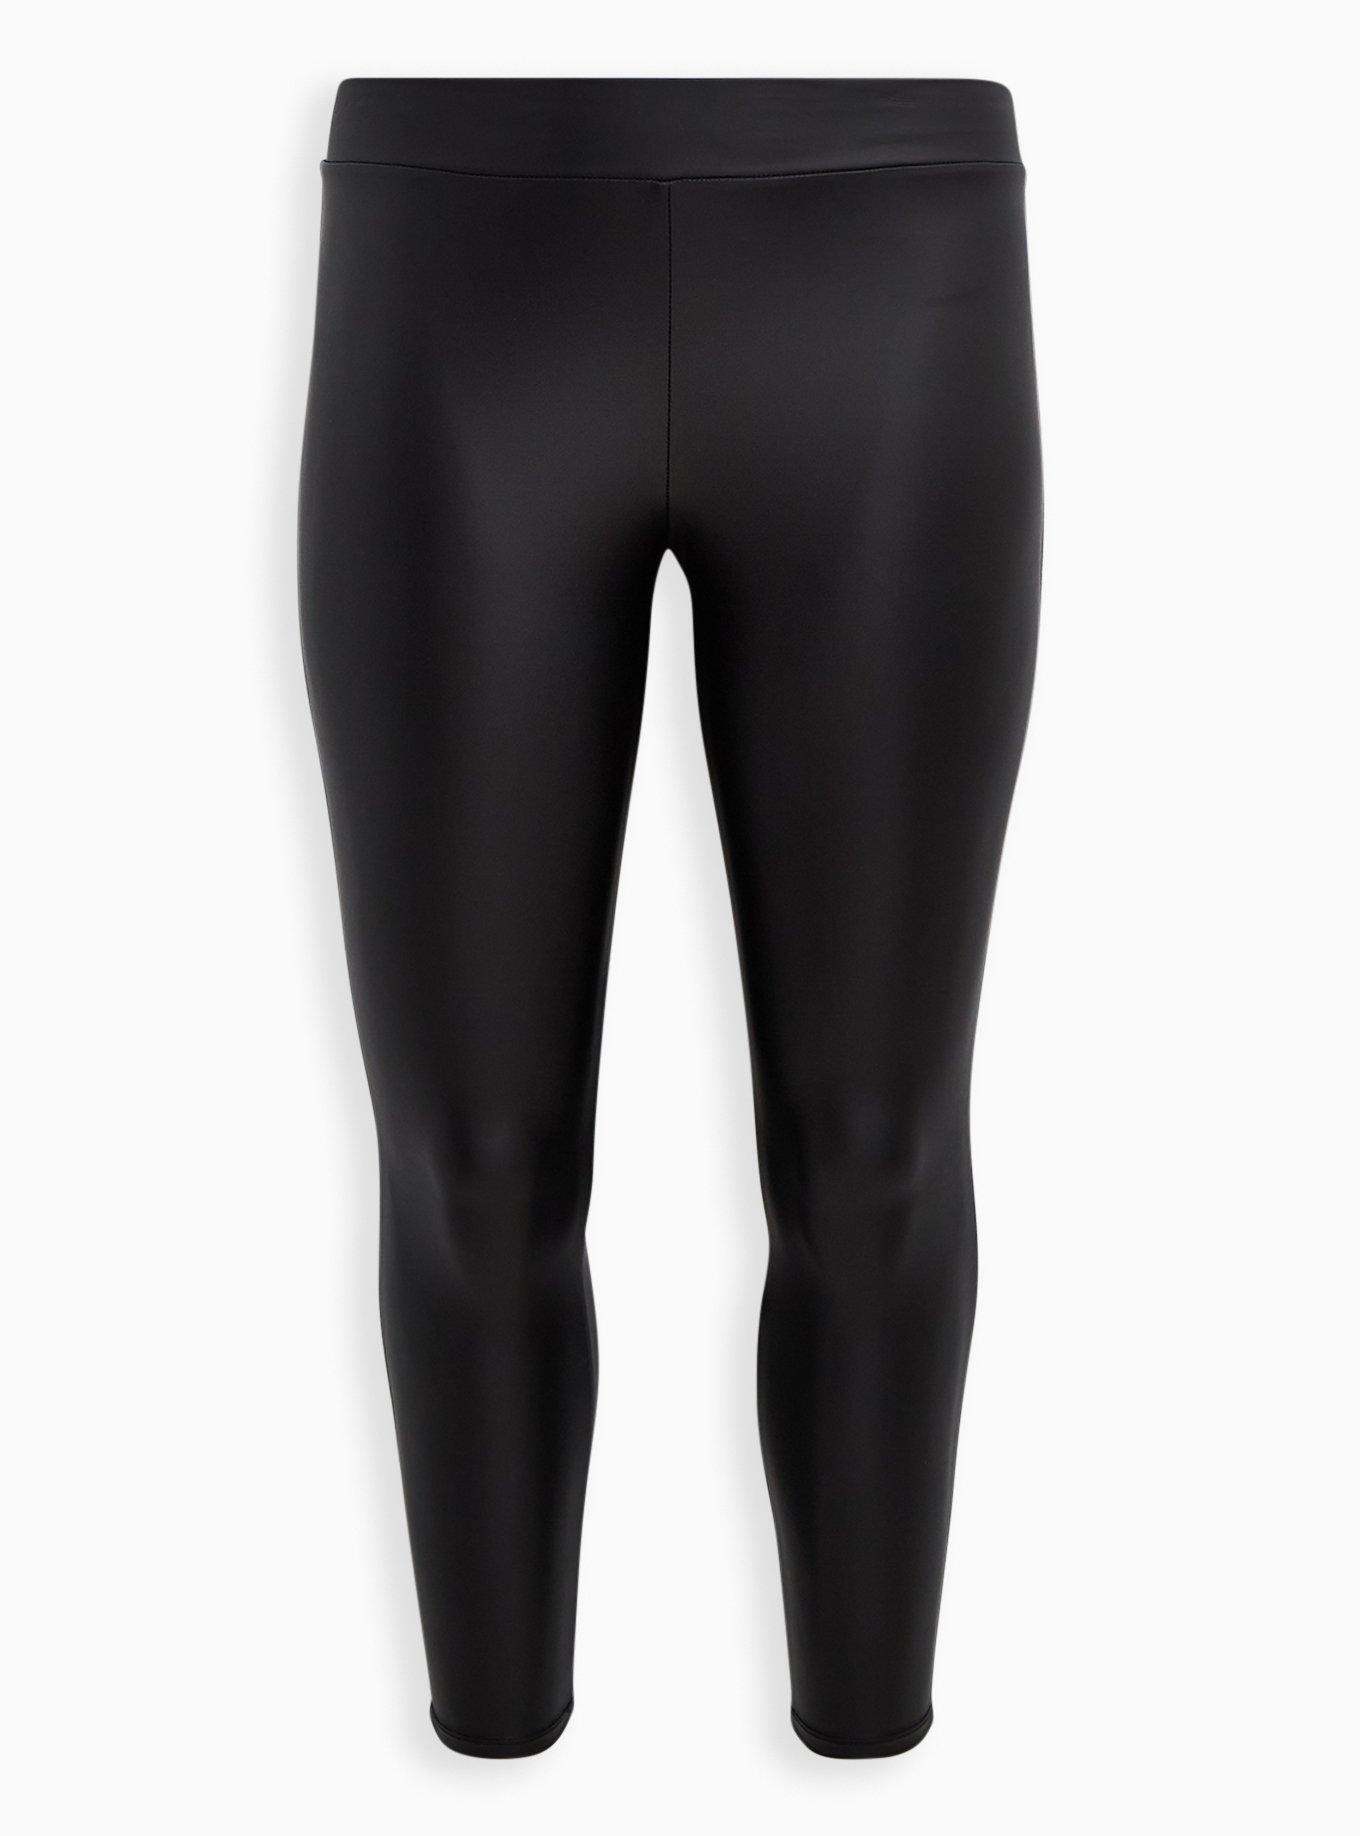 Cool Wholesale Skin Tight Shiny Leggings In Any Size And Style 